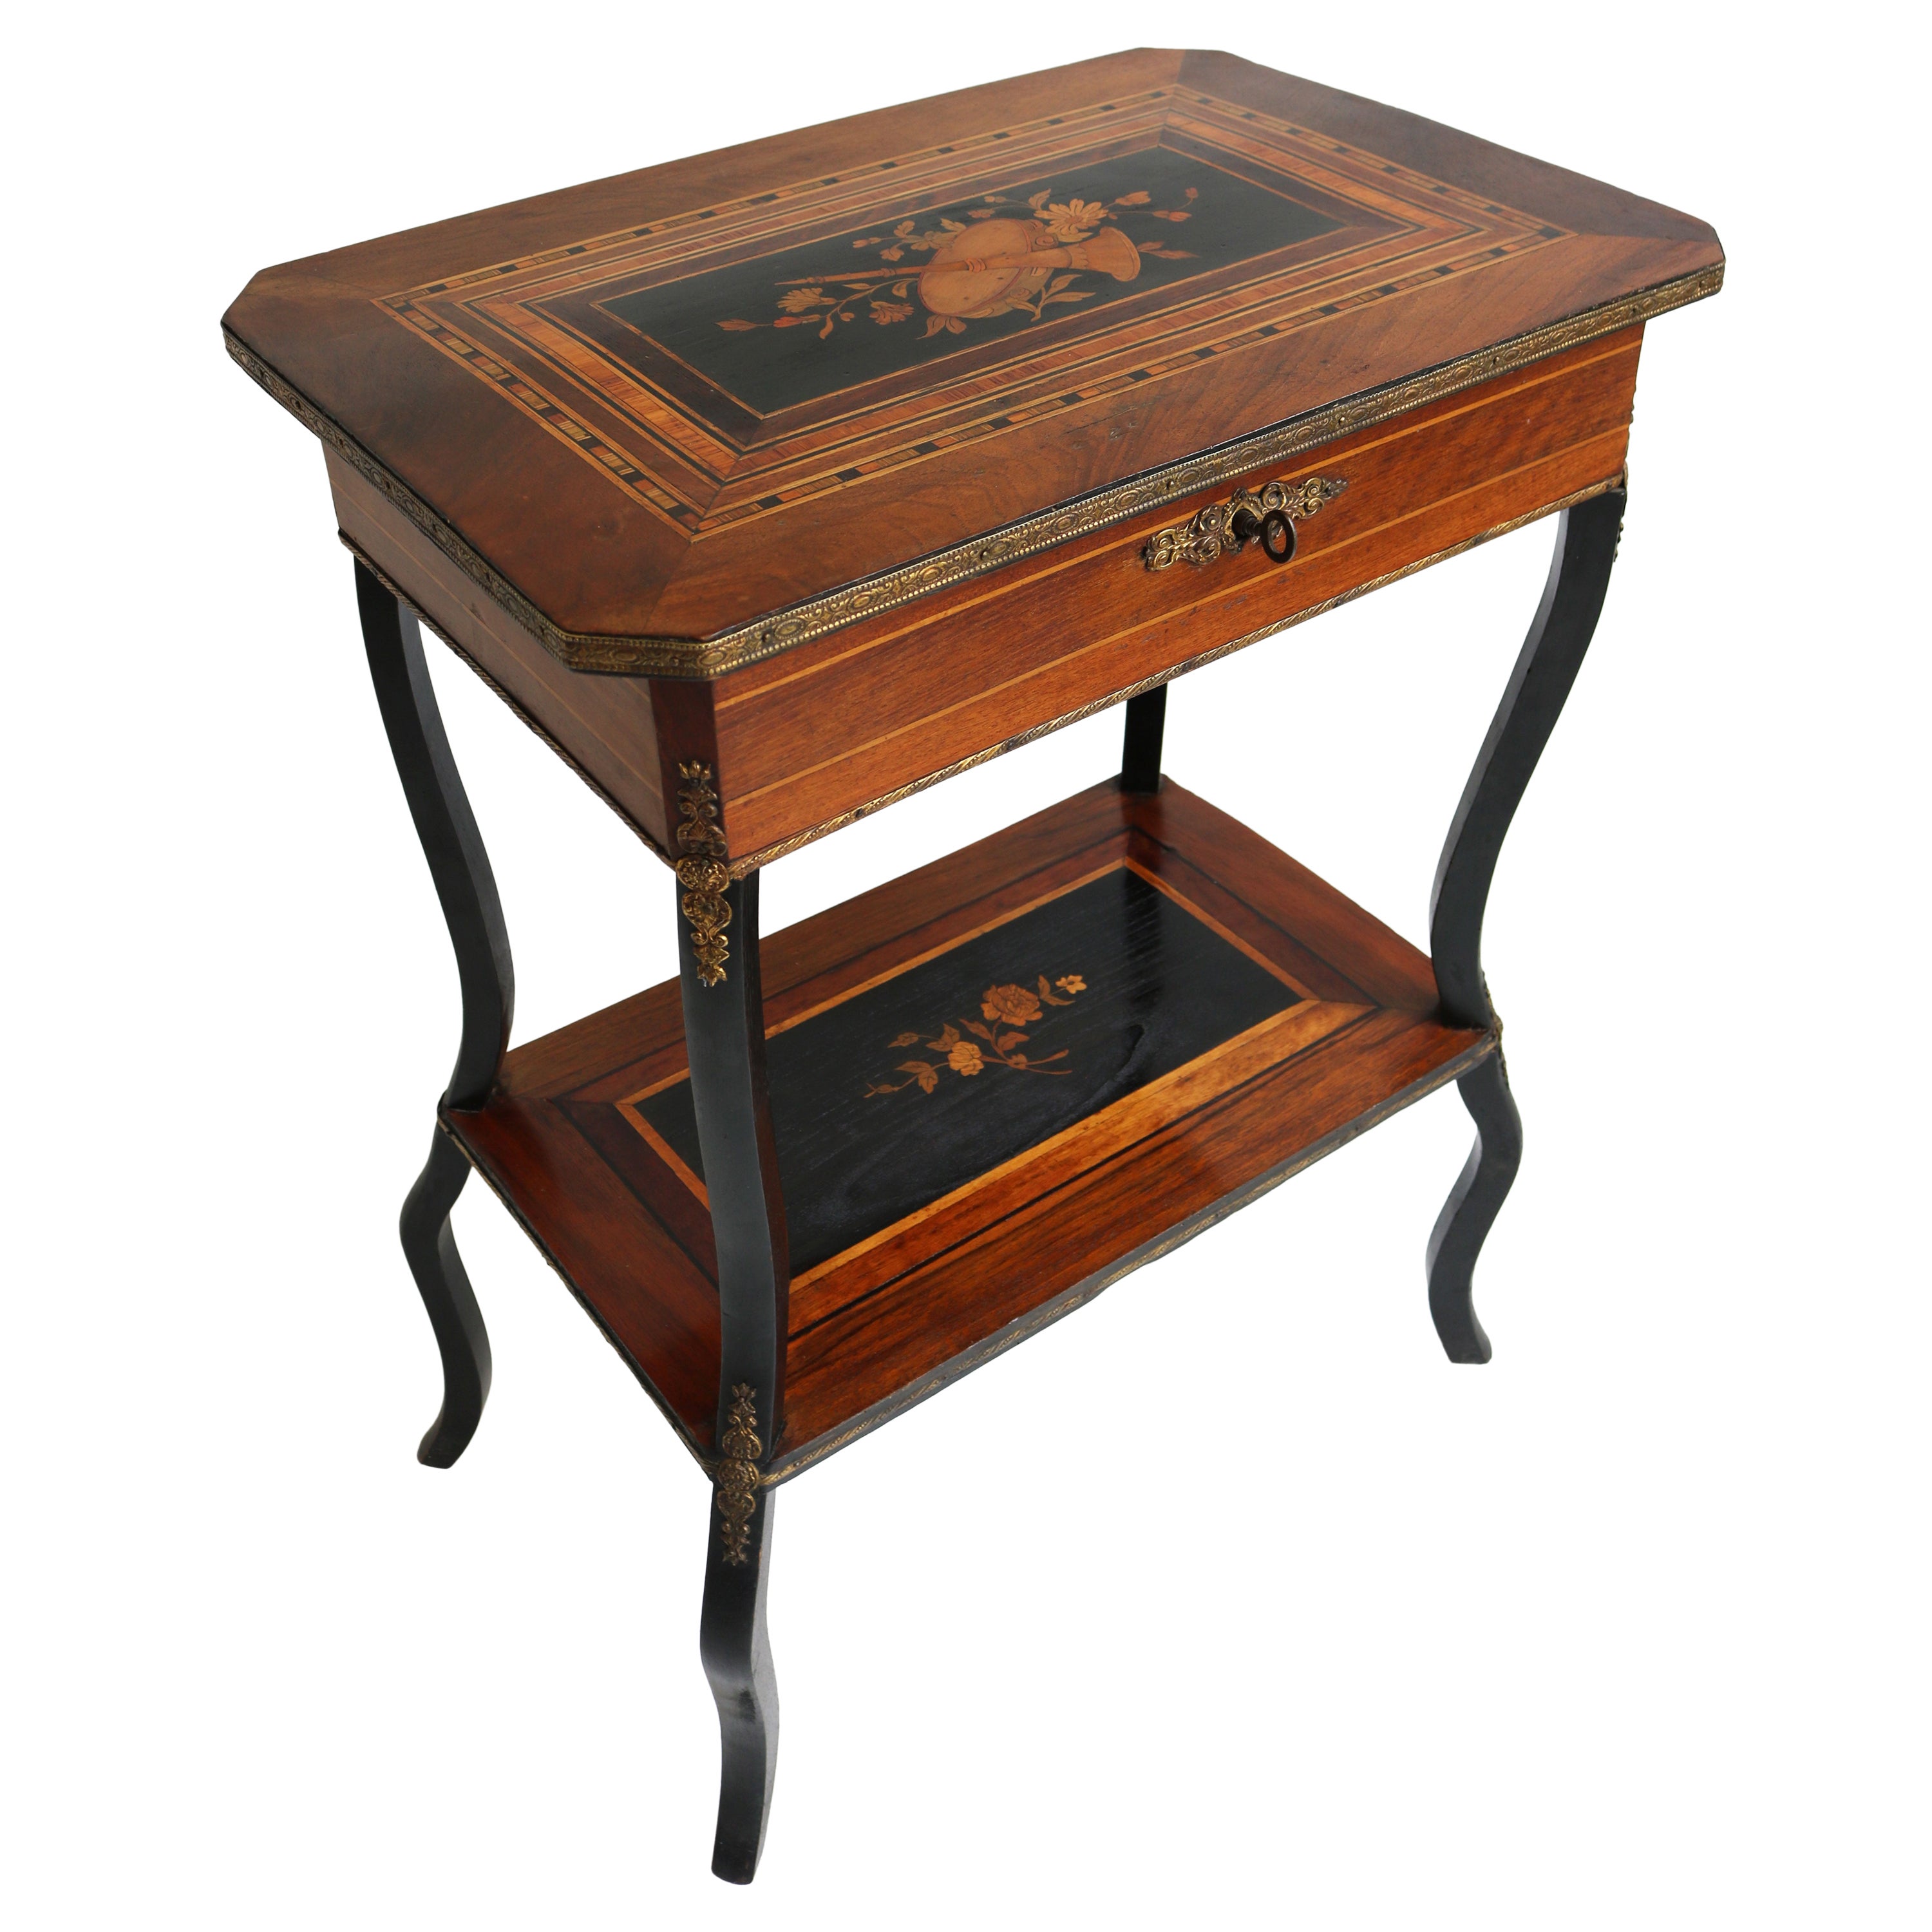 Antique French Inlaid Napoleon III Side Table / Vanity 19th Century Marquetry